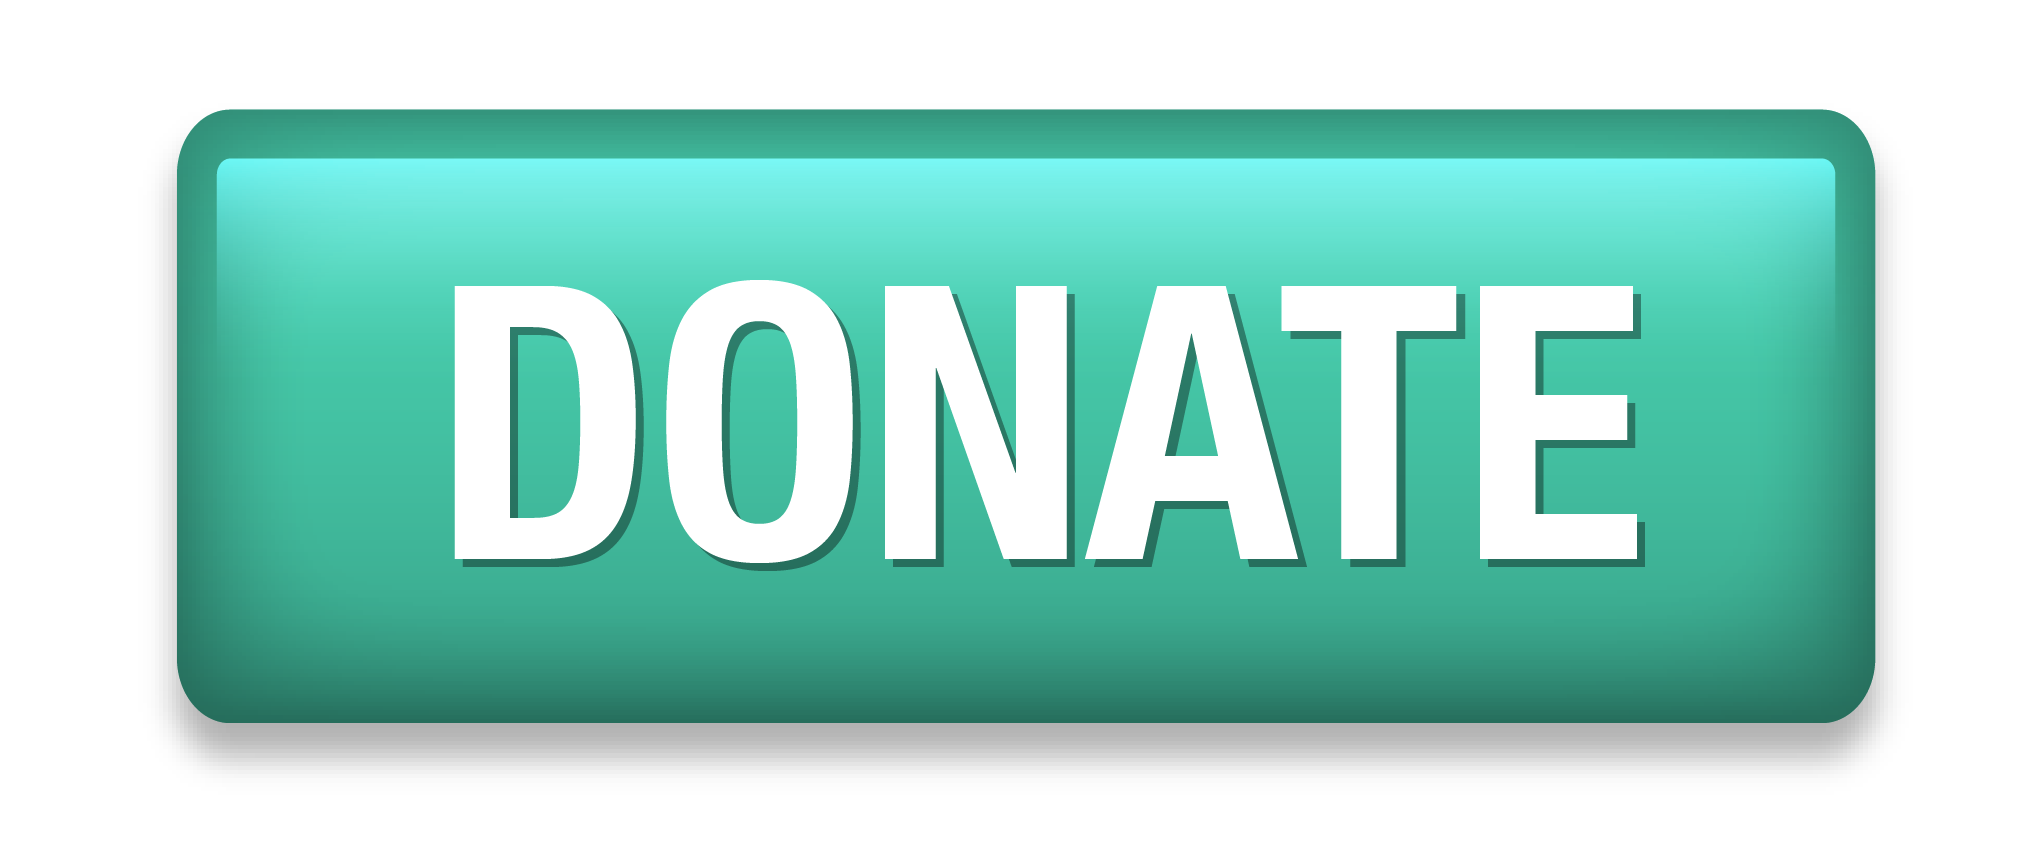 Donate PNG Images Transparent Background | PNG Play